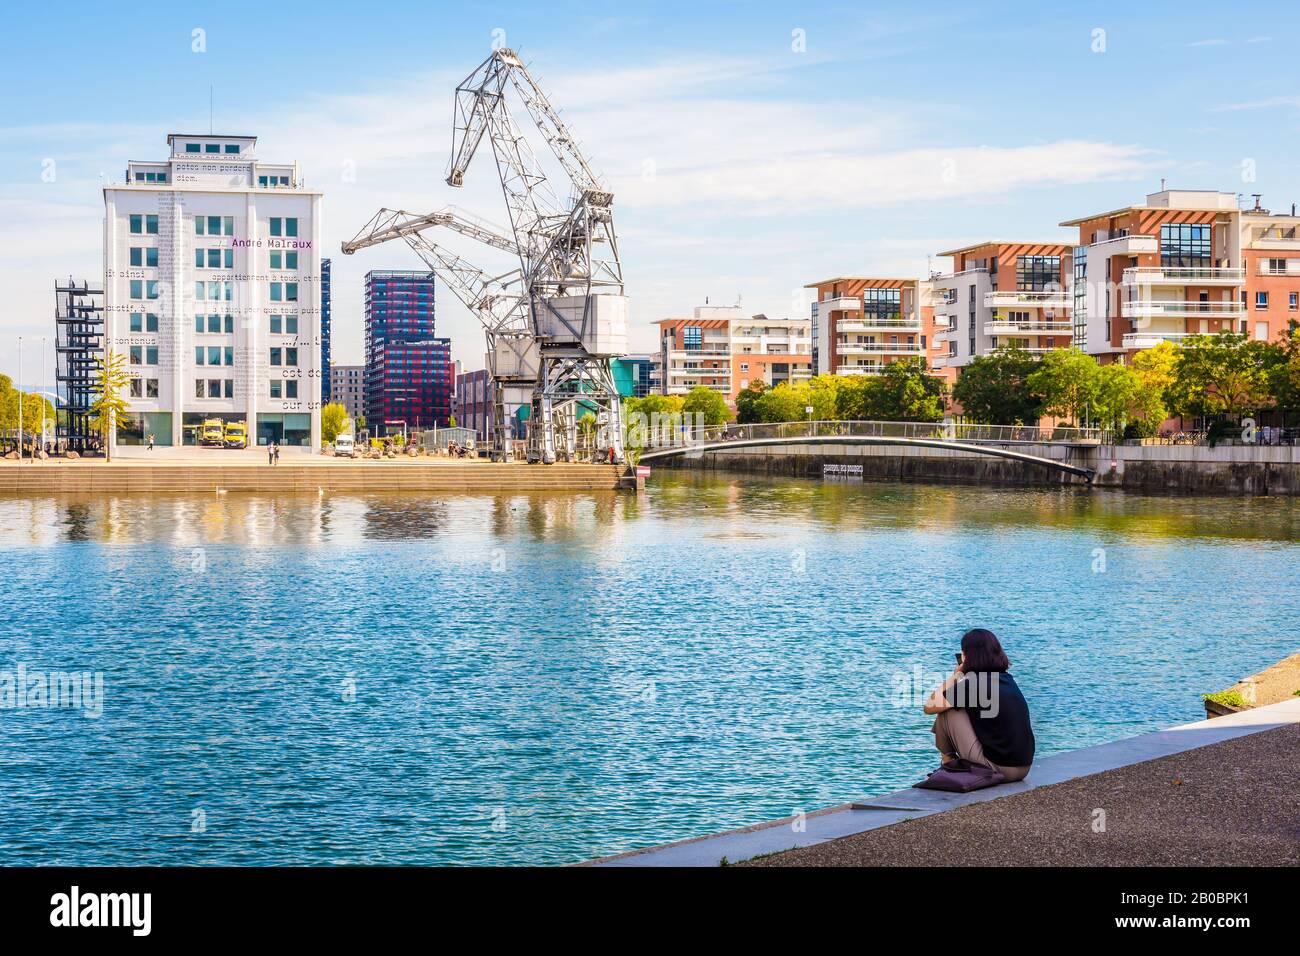 A woman sitting beside the Austerlitz basin, staring at the peninsula Andre Malraux in the new district of Les Fronts de Neudorf in Strasbourg, France Stock Photo